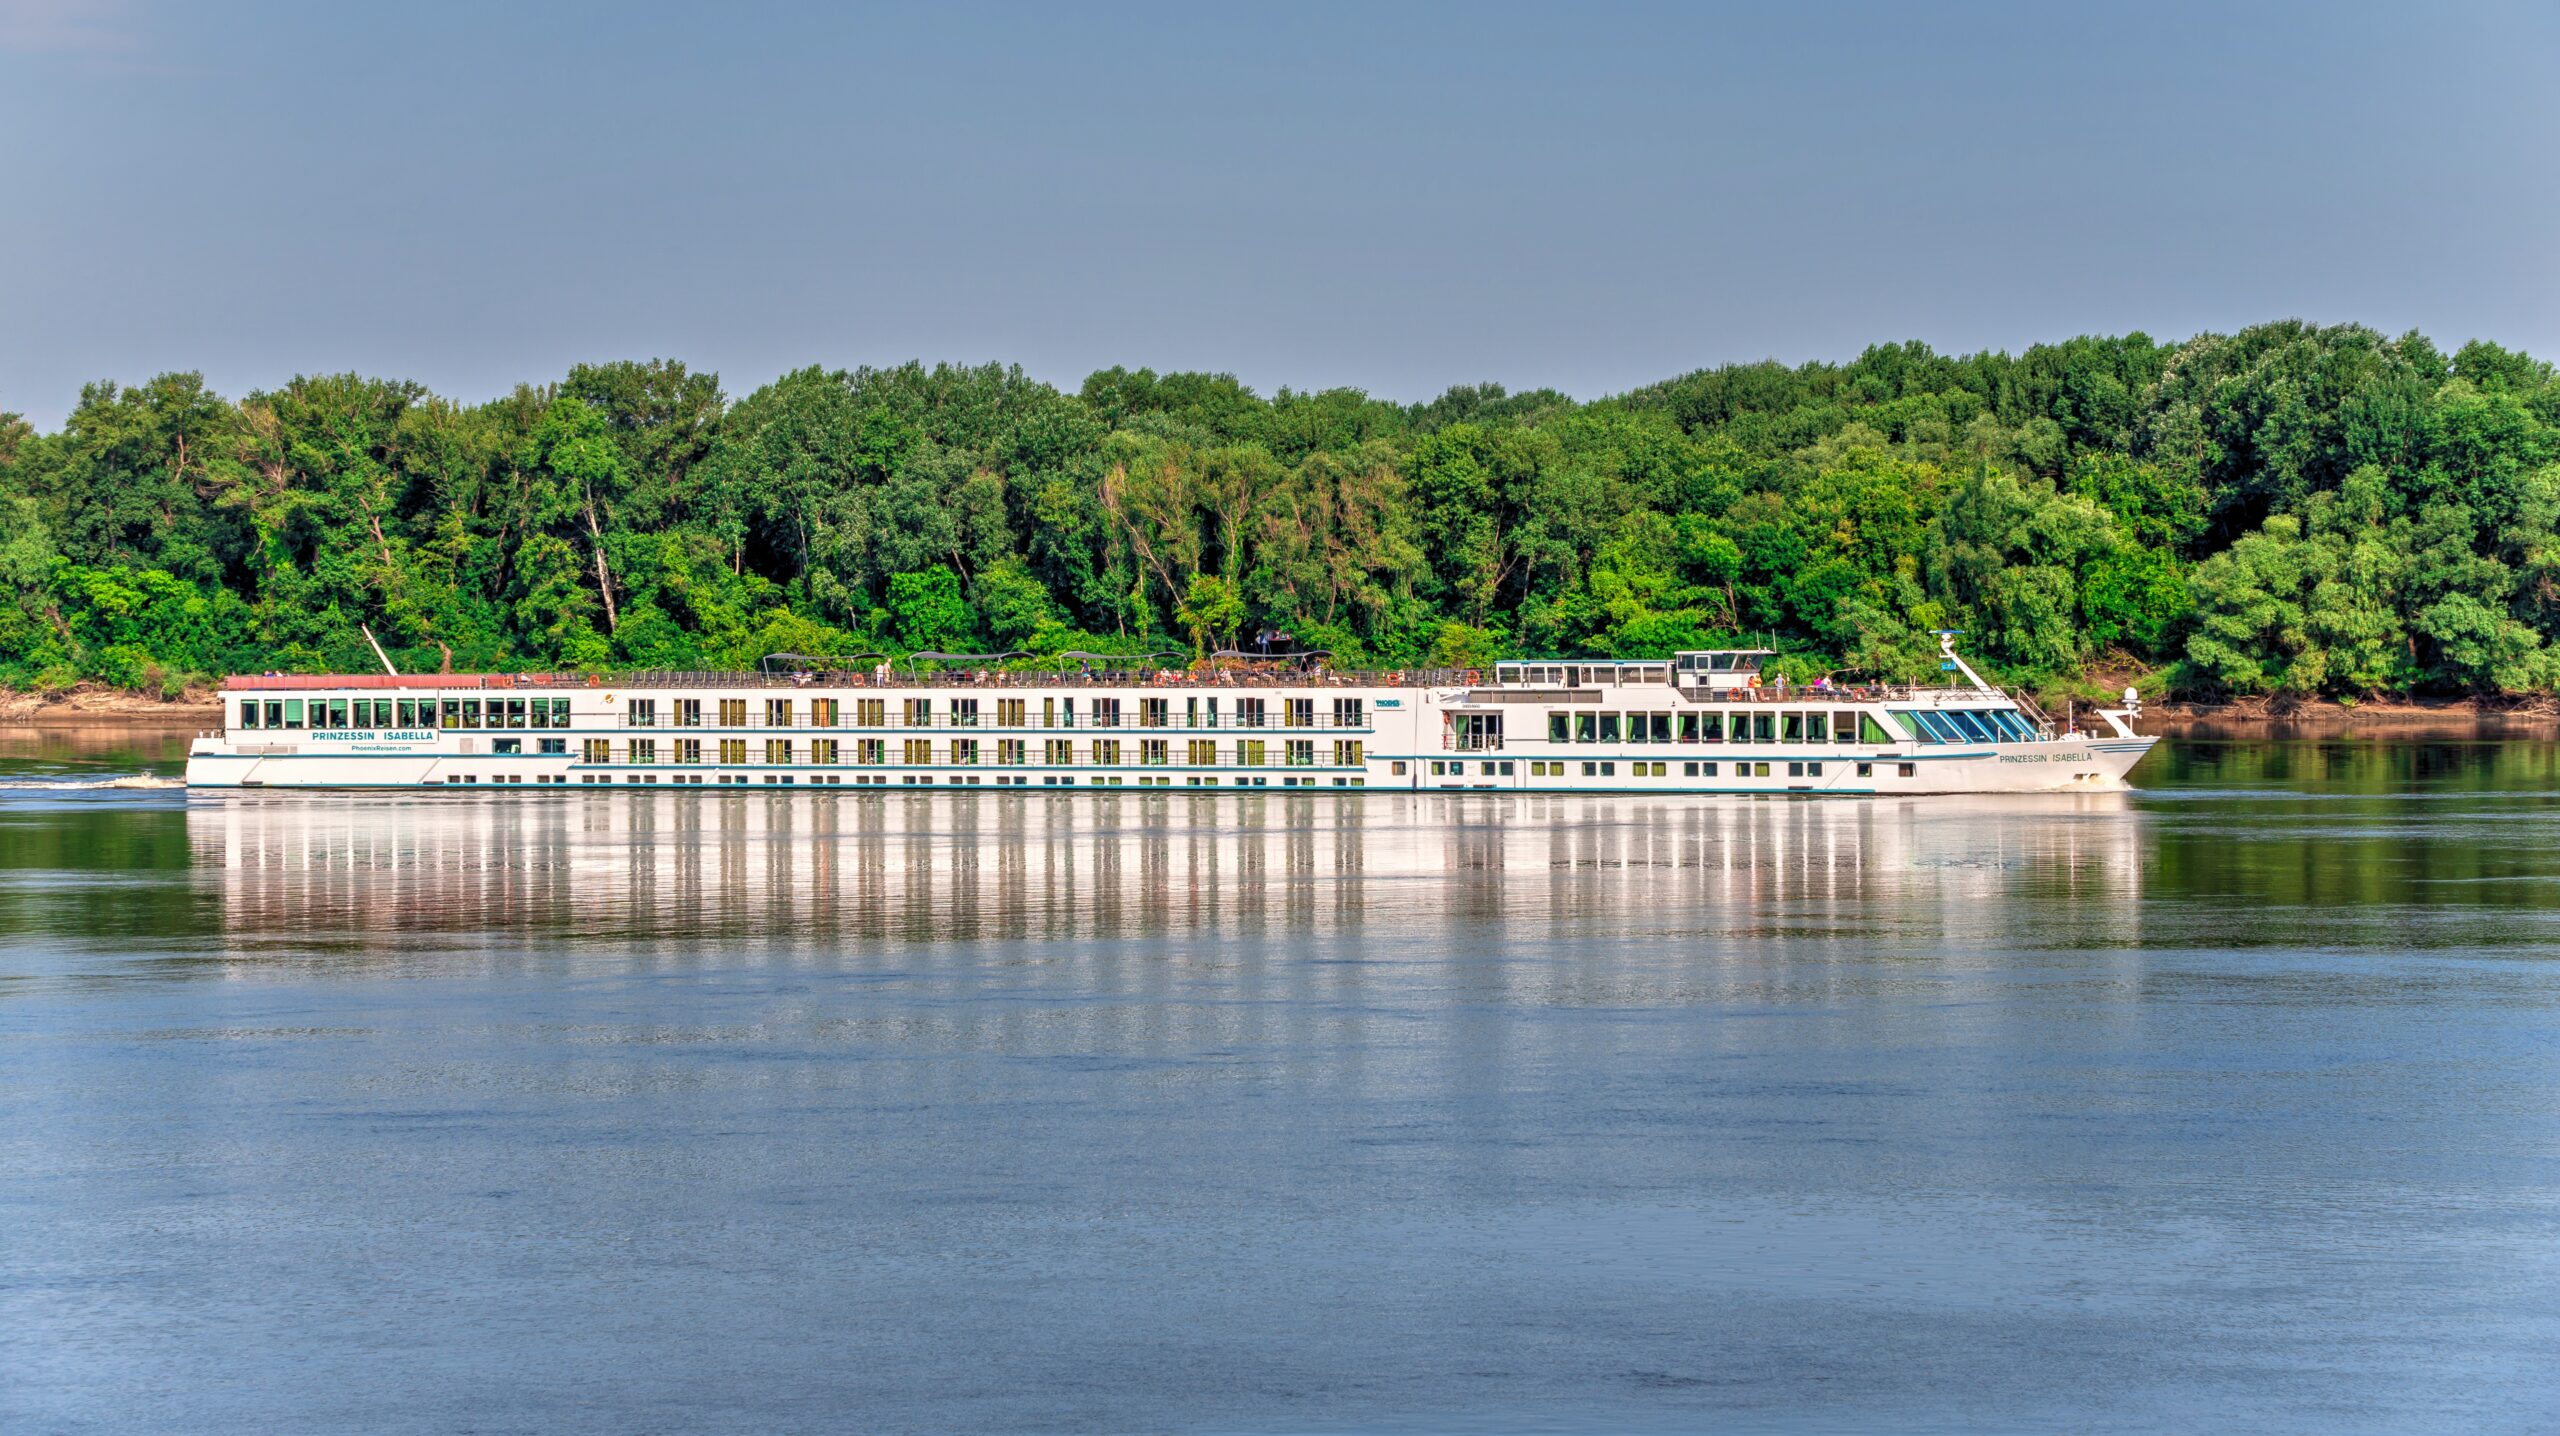 Maximize Your River Cruise Experience from Embarkation to Excursions - River Cruise Ship on the Danube River